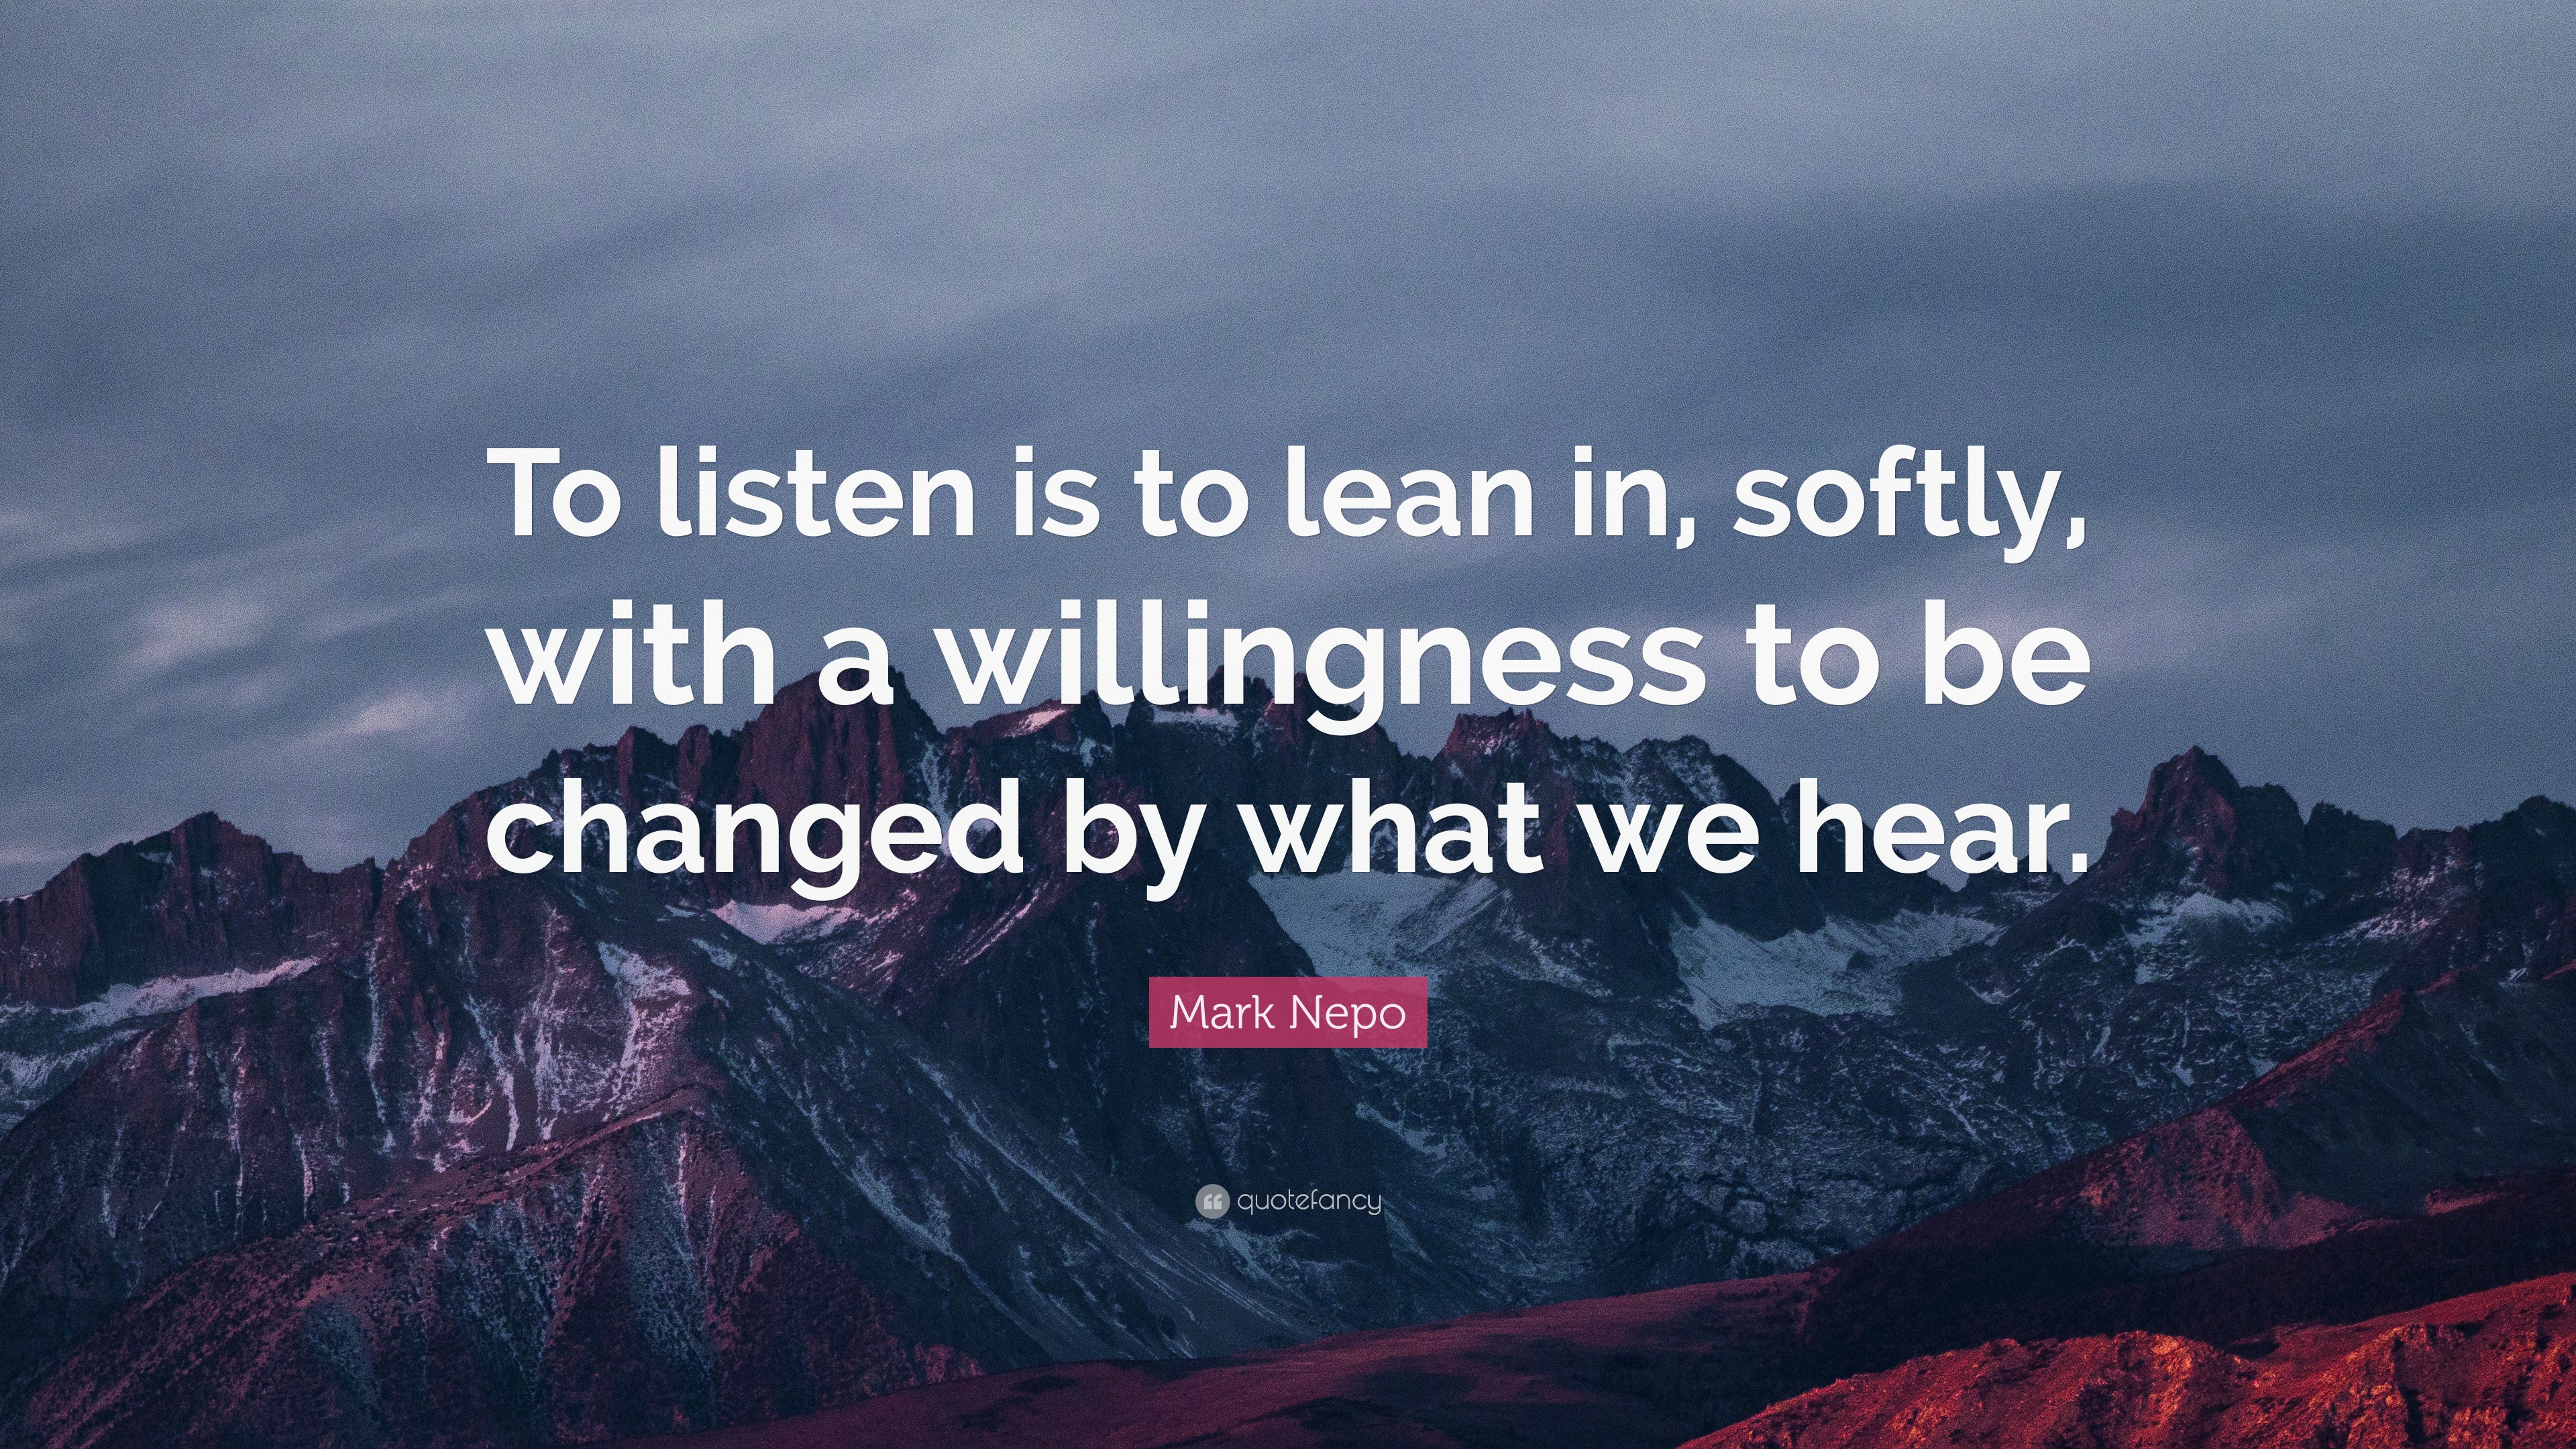 2123592 Mark Nepo Quote To listen is to lean in softly with a willingness